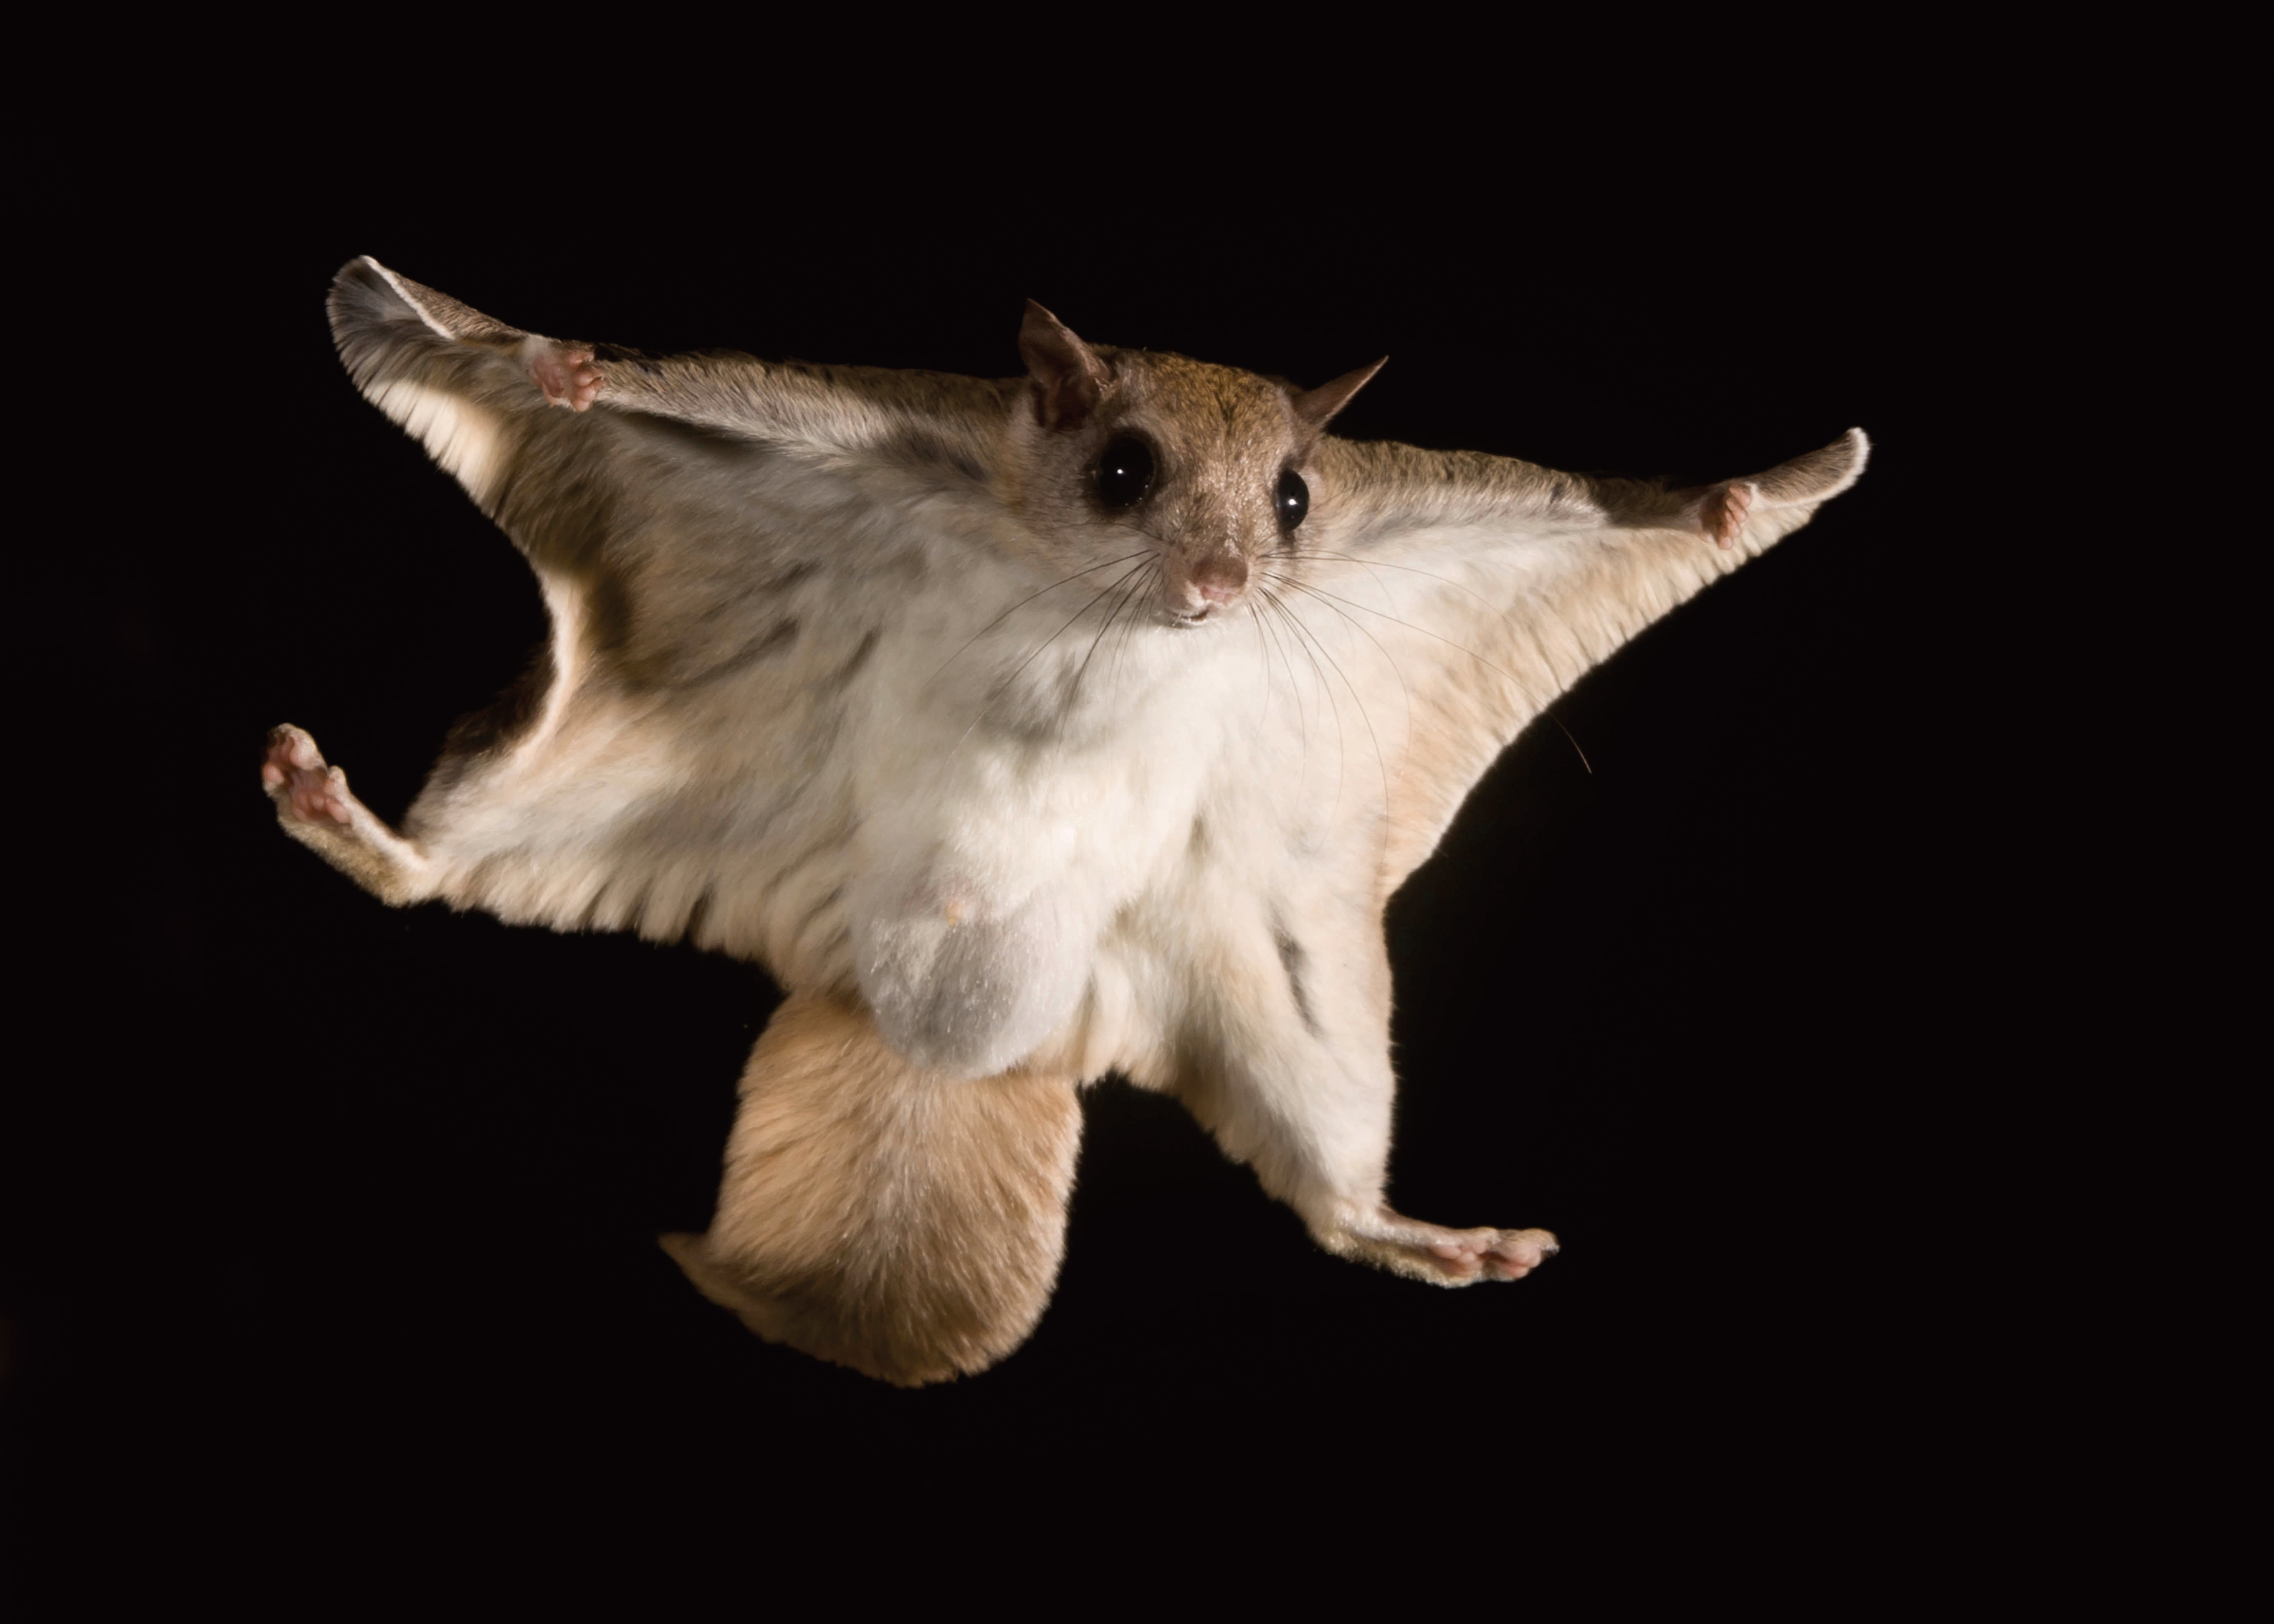 A squirrel fans out its legs to glide through the air.